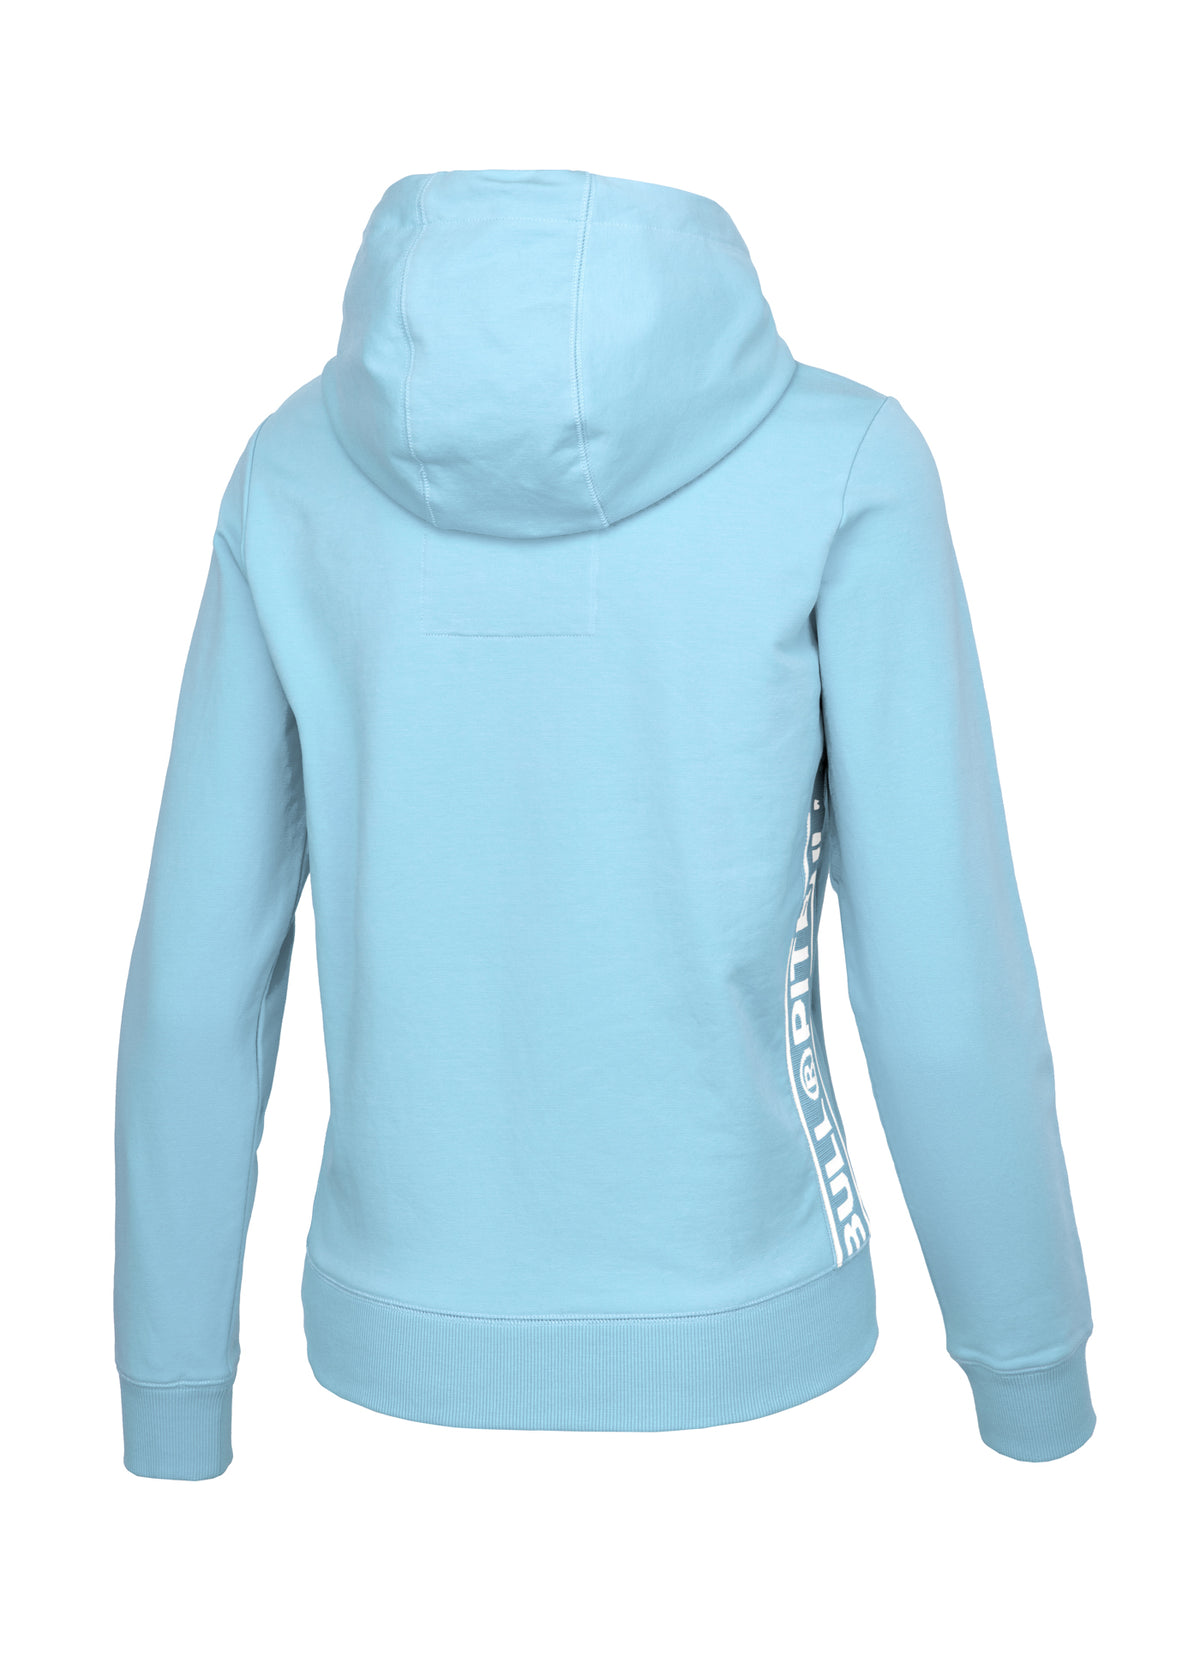 LA CANADA French Terry Light Blue Hoodie